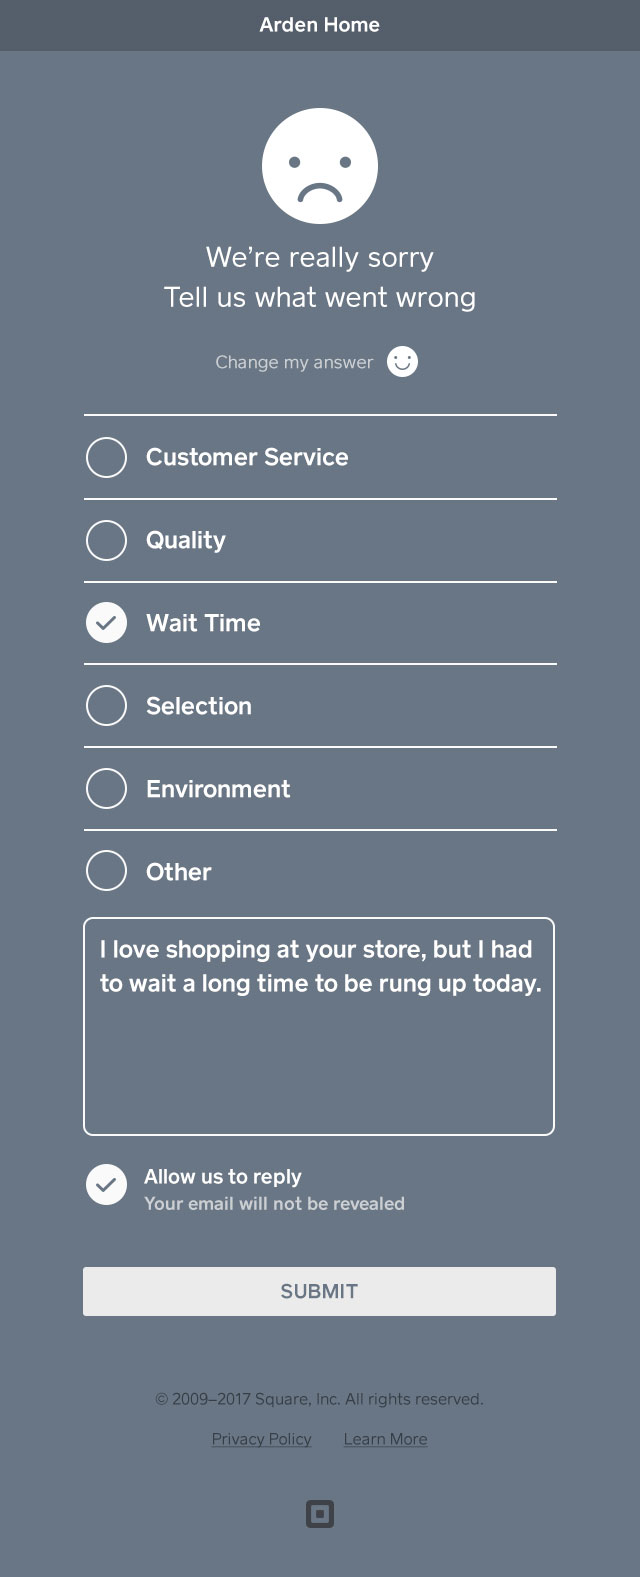 provide additional feedback on your experience with the merchant